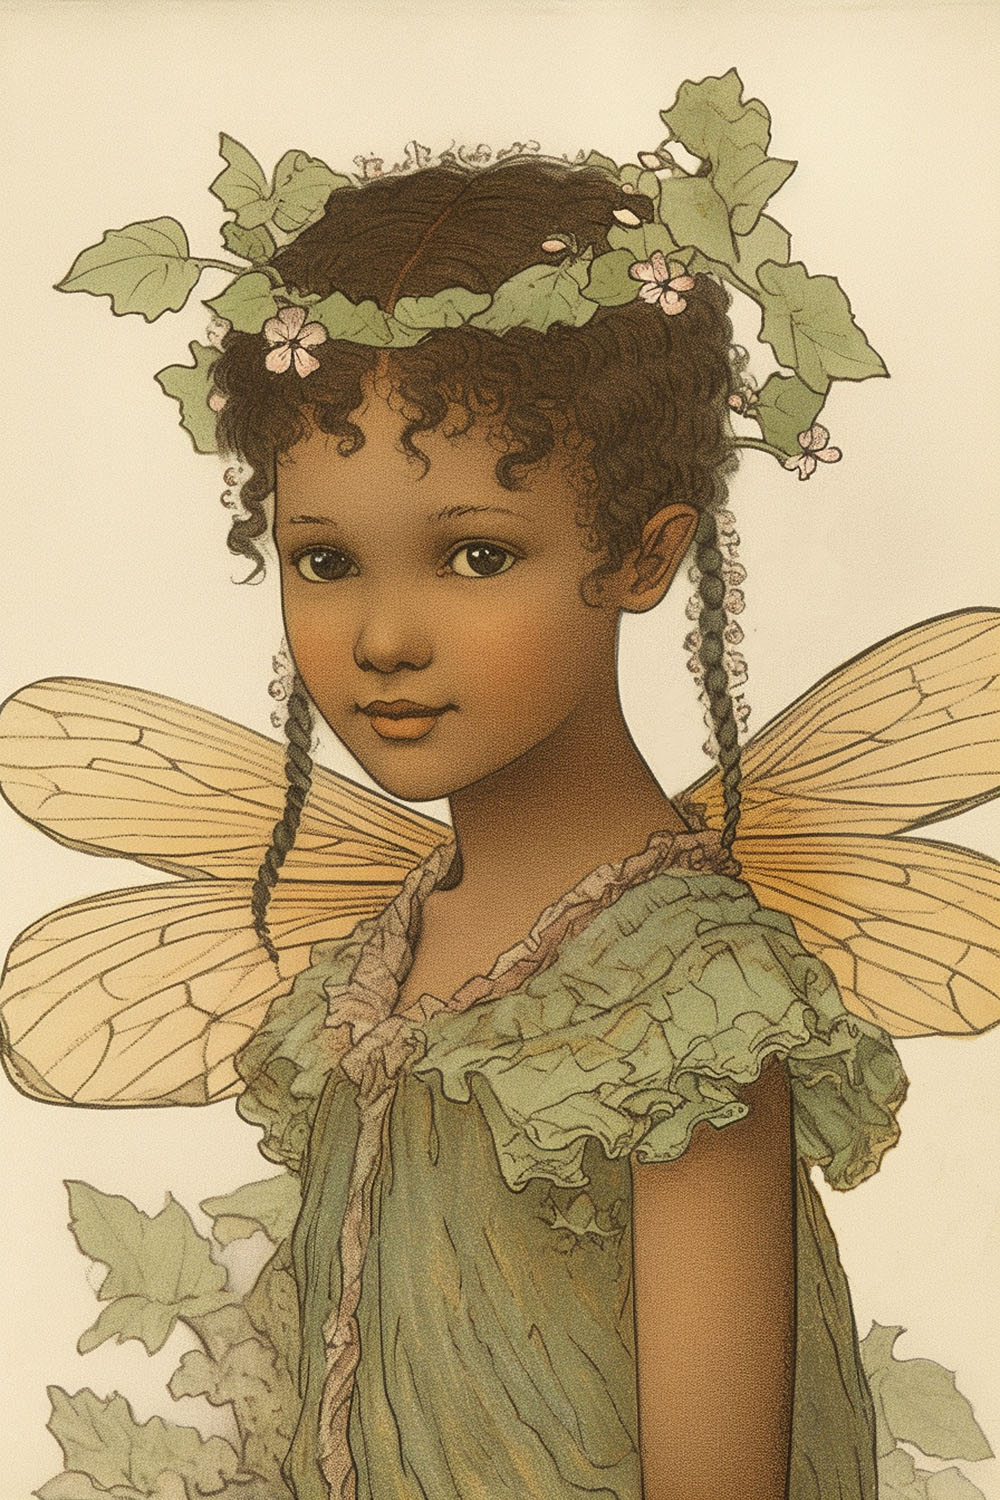 Girl with Dragonfly wings